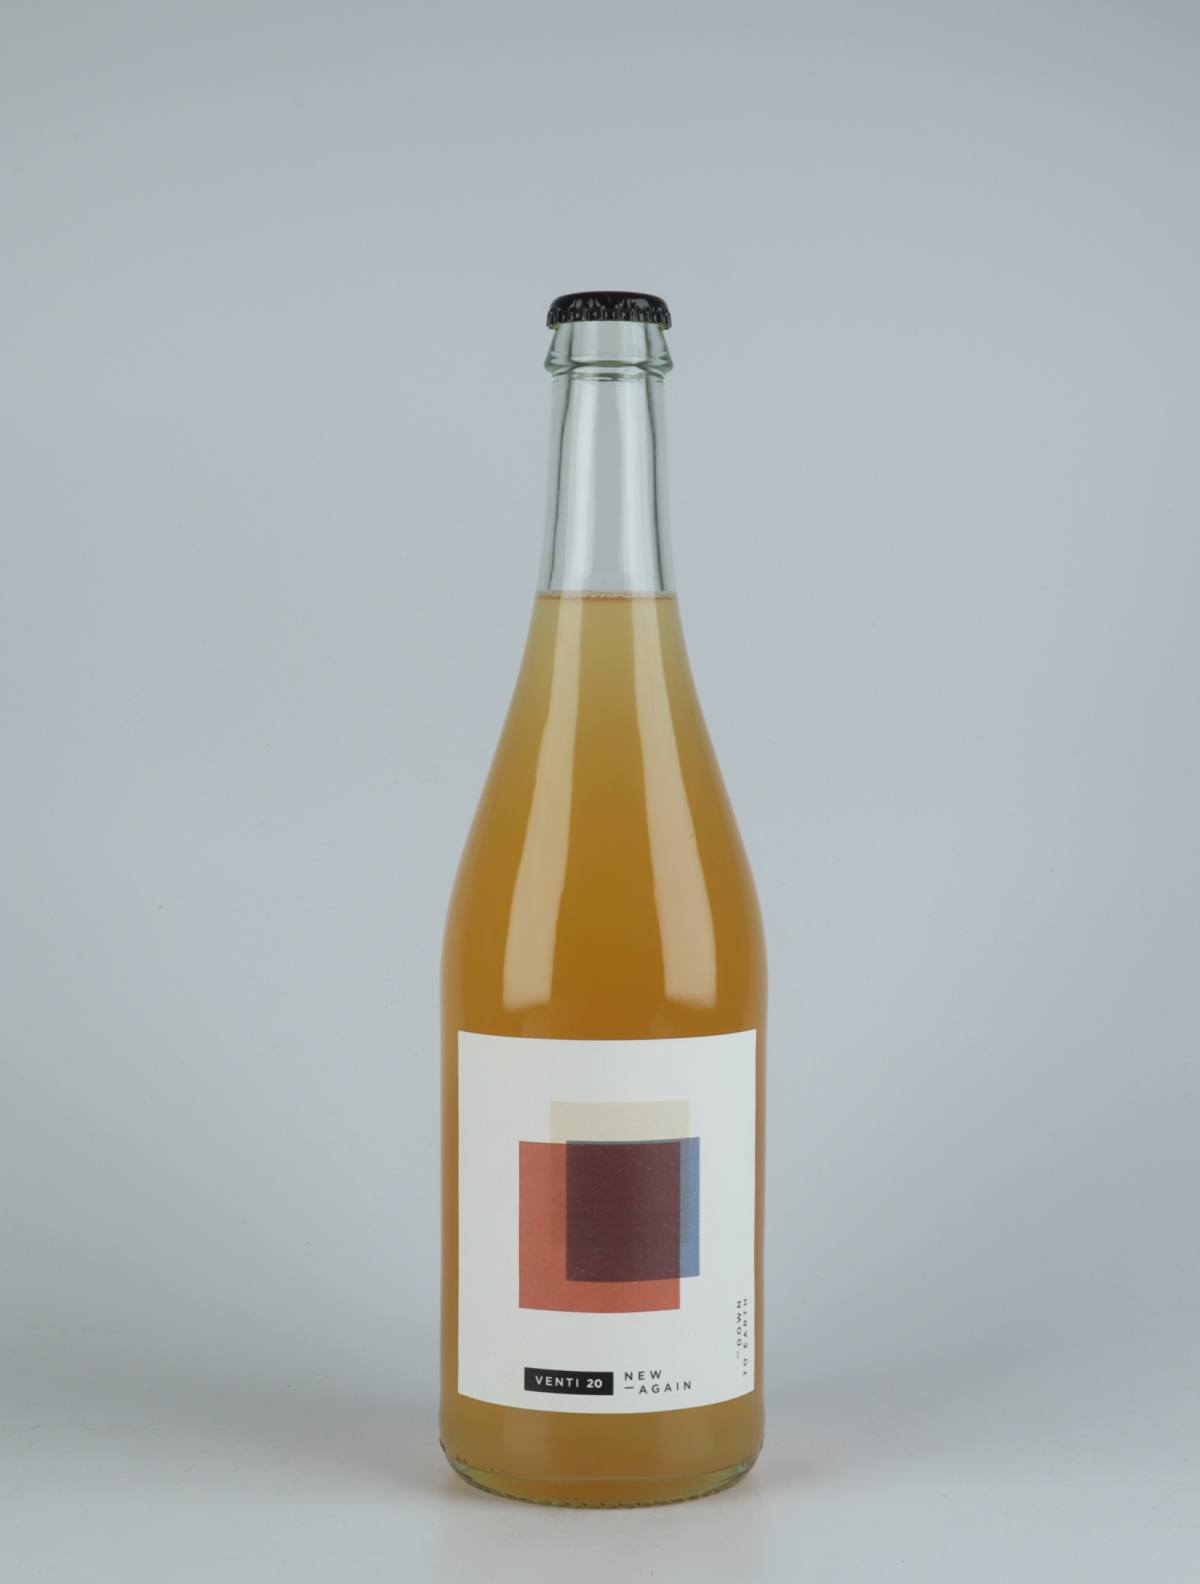 A bottle 2020 New Again Orange wine from do.t.e Vini, Tuscany in Italy